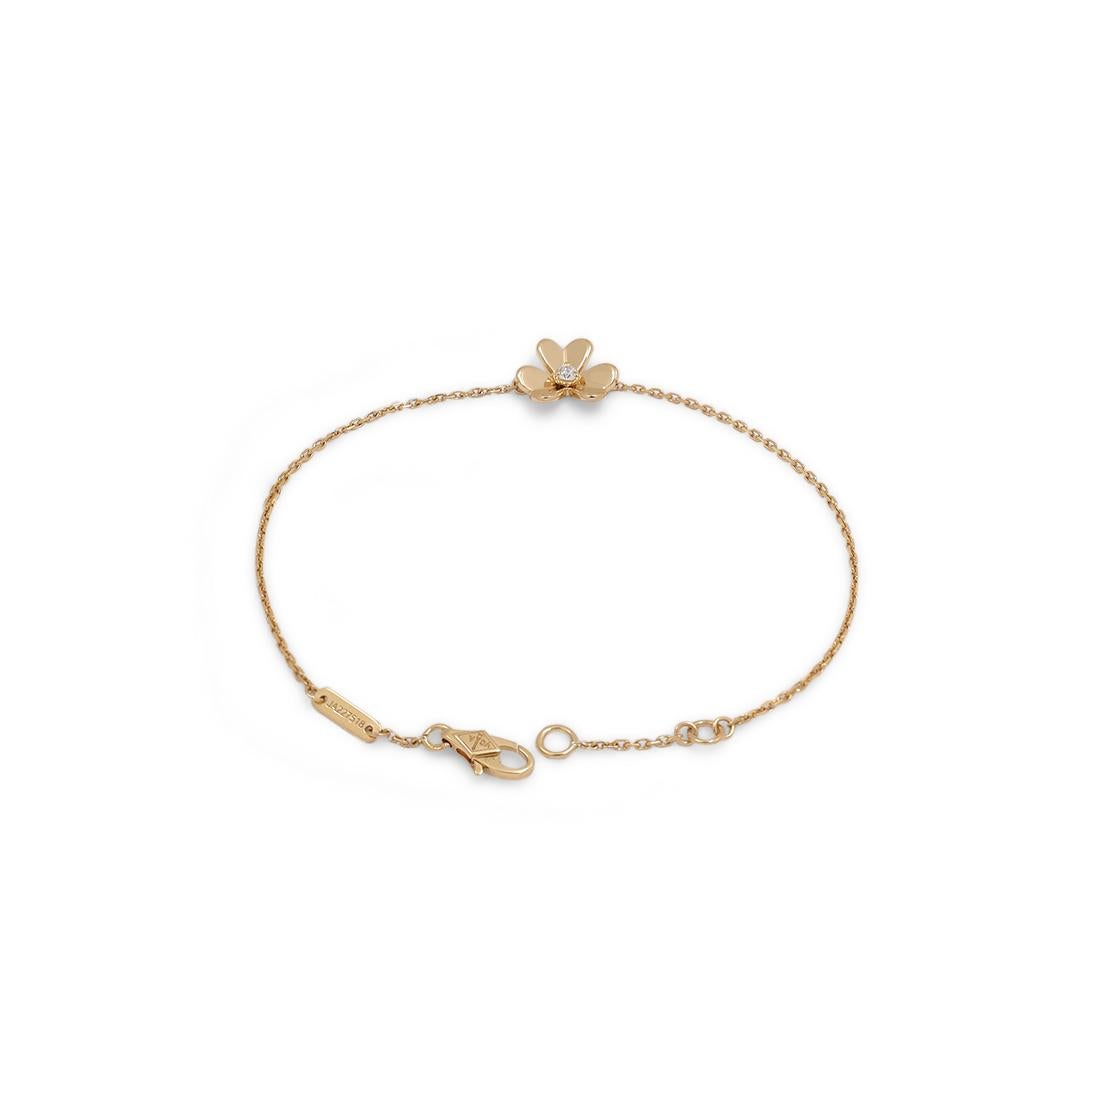 Authentic Van Cleef & Arpels 'Frivole' bracelet crafted in mirror-polished 18 karat yellow gold and set with a single round brilliant cut diamond at the center weighing approximately .05 carats. Signed VCA, 740, with serial number. Will fit up to a